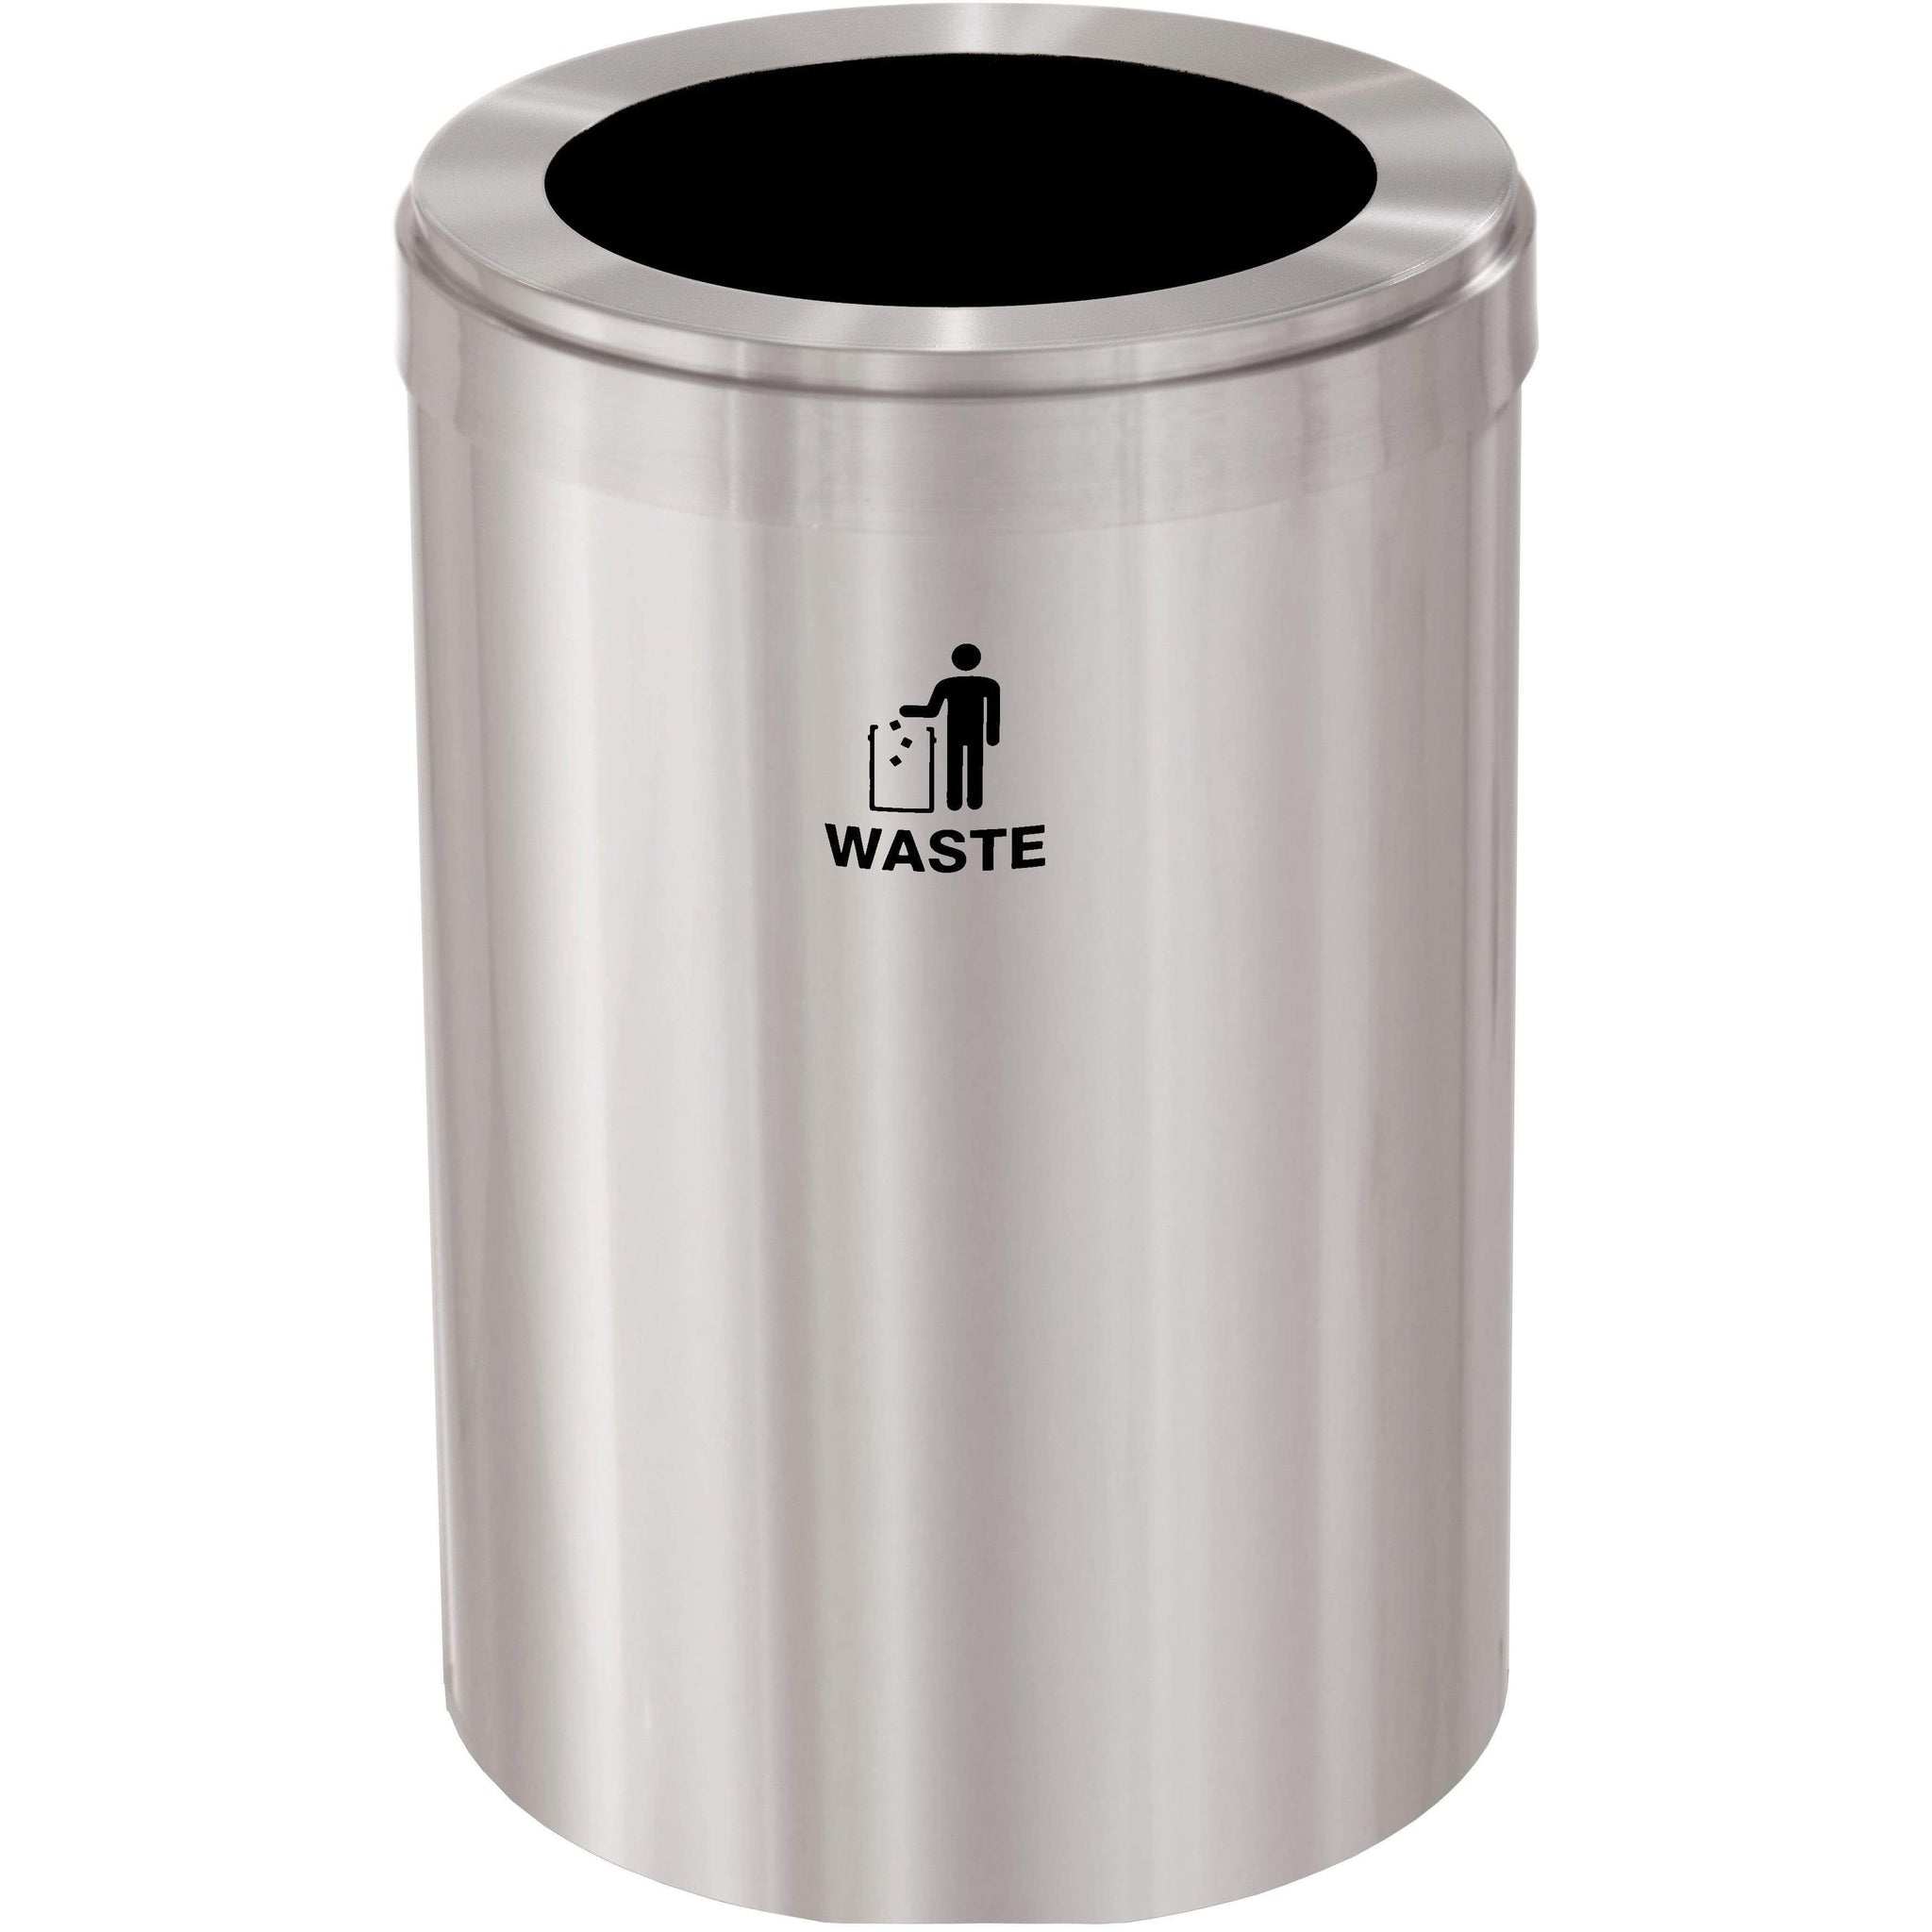 The Venue Series Recycling Bin, Stainless Steel, 33 Gallon